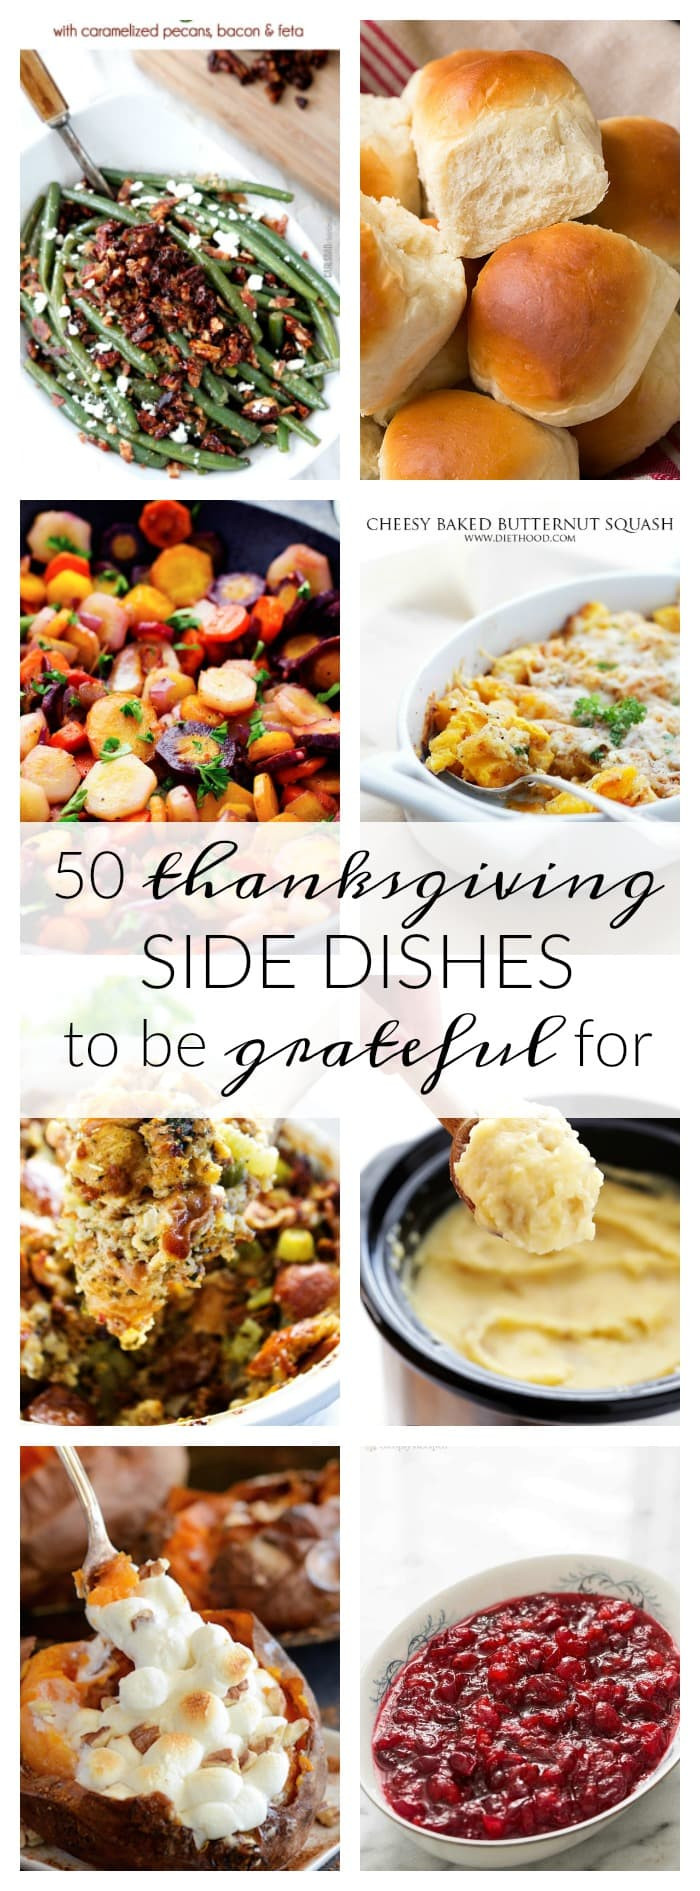 Thanksgiving Side Dishes Pinterest
 50 Thanksgiving Side Dishes To Be Grateful For A Dash of